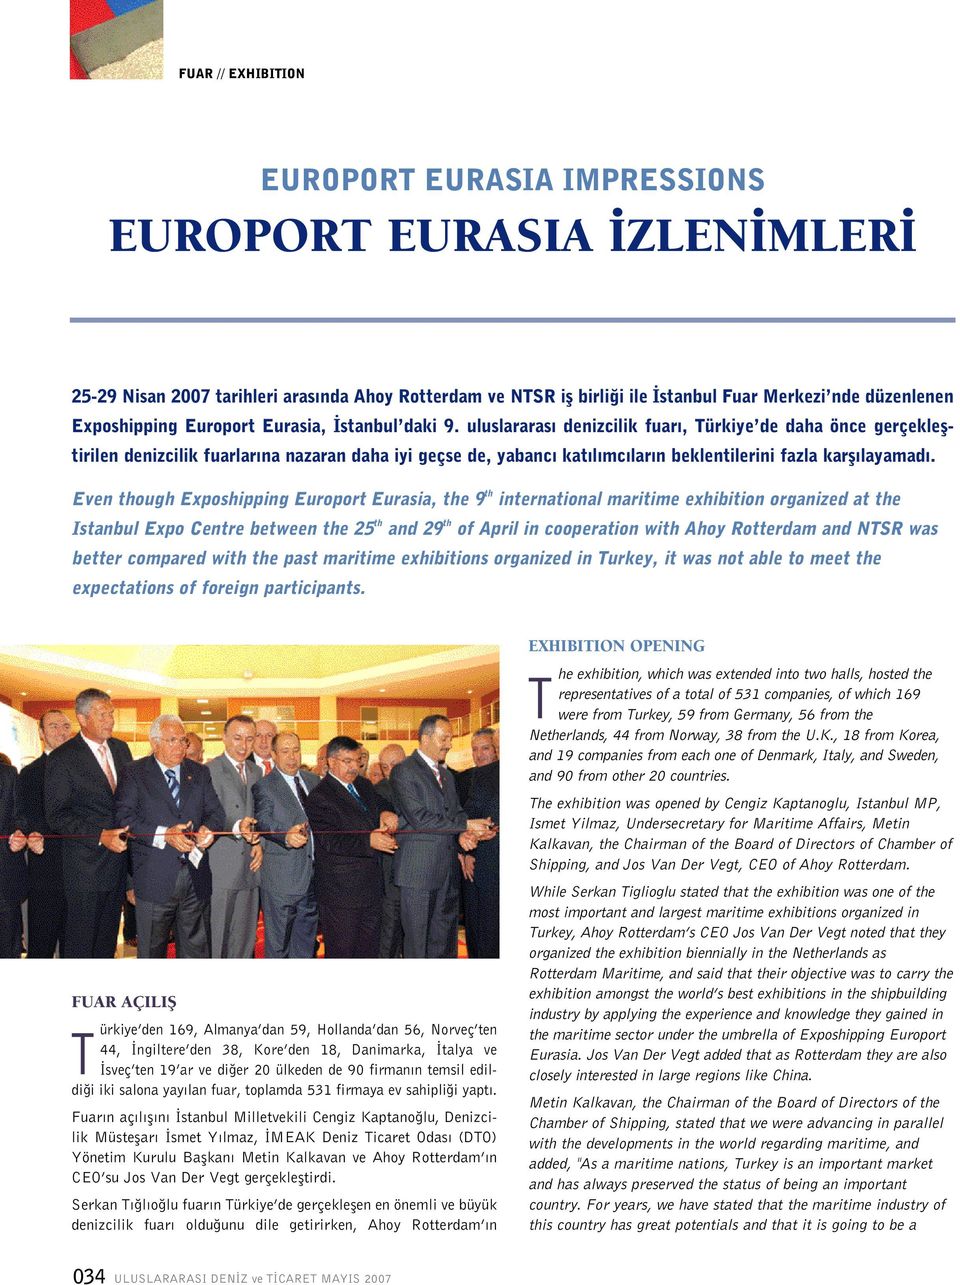 Even though Exposhipping Europort Eurasia, the 9 th international maritime exhibition organized at the Istanbul Expo Centre between the 25 th and 29 th of April in cooperation with Ahoy Rotterdam and